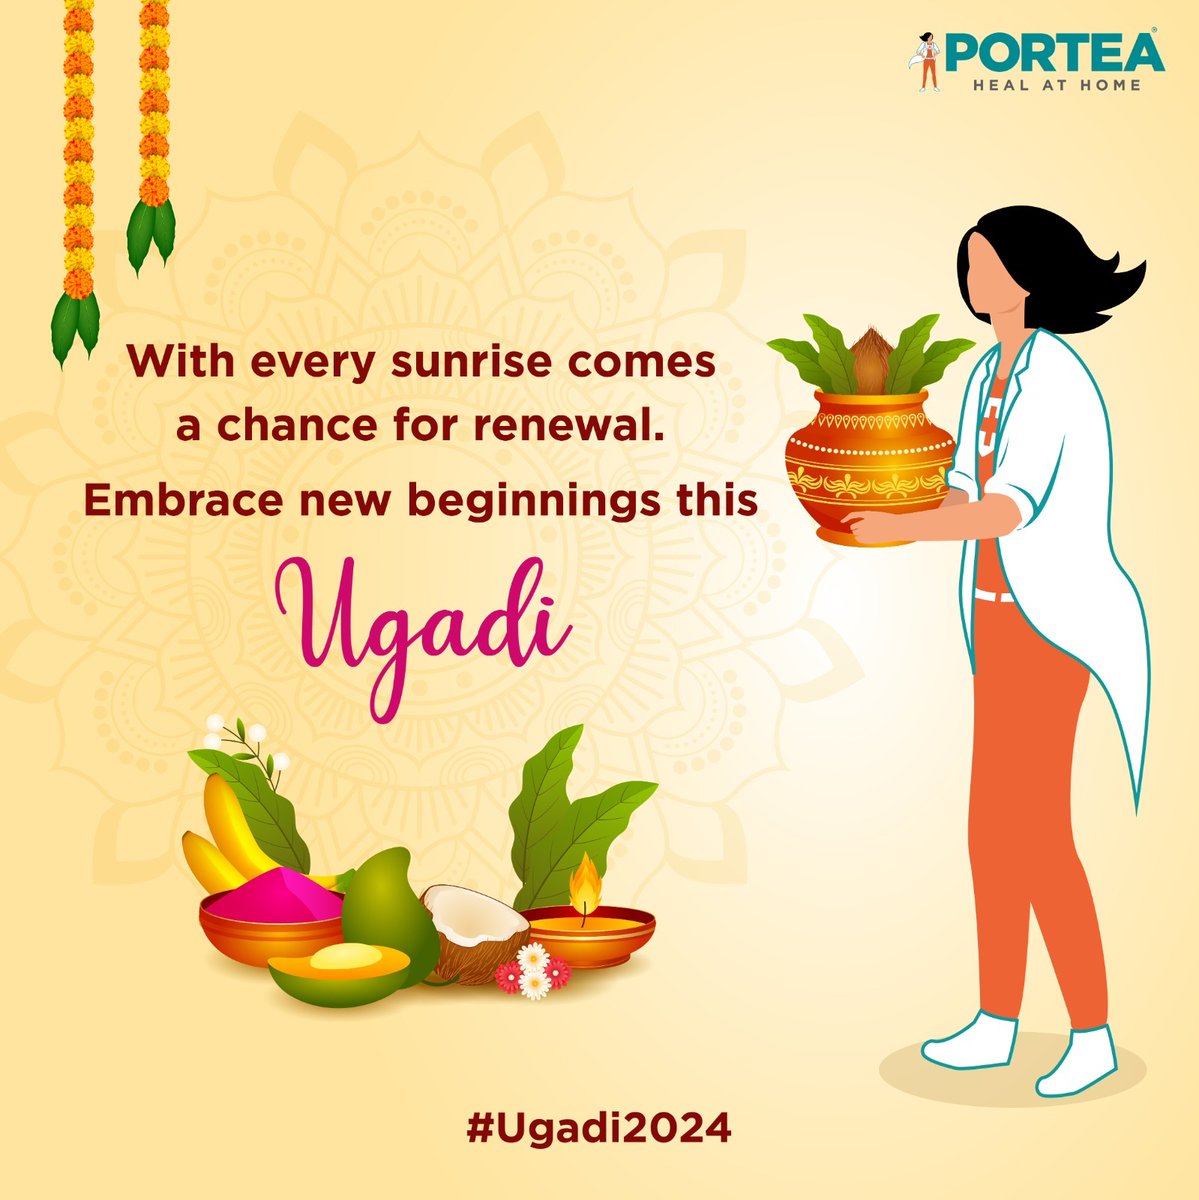 Wishing you a delightful Ugadi filled with happiness, peace, and success. May this festival mark the start of a year filled with positivity and fulfillment. #Ugadi #FestiveSeason #NewBeginnings #Blessings #Happiness #PorteaMedical #ChironCares #Ugadi2024